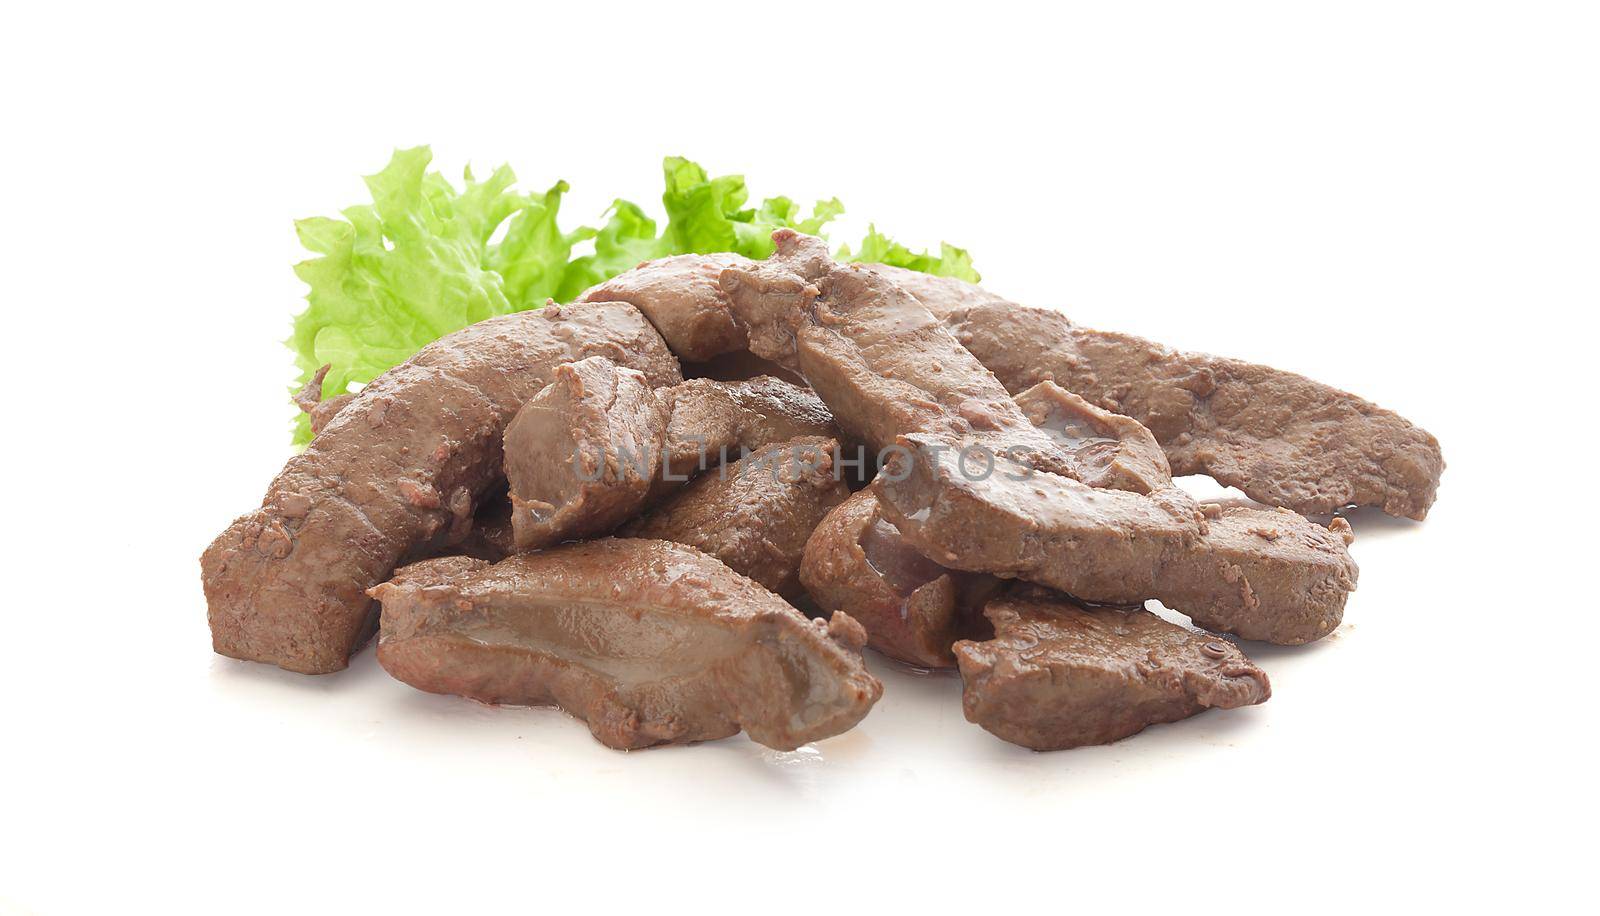 Fried liver by Angorius